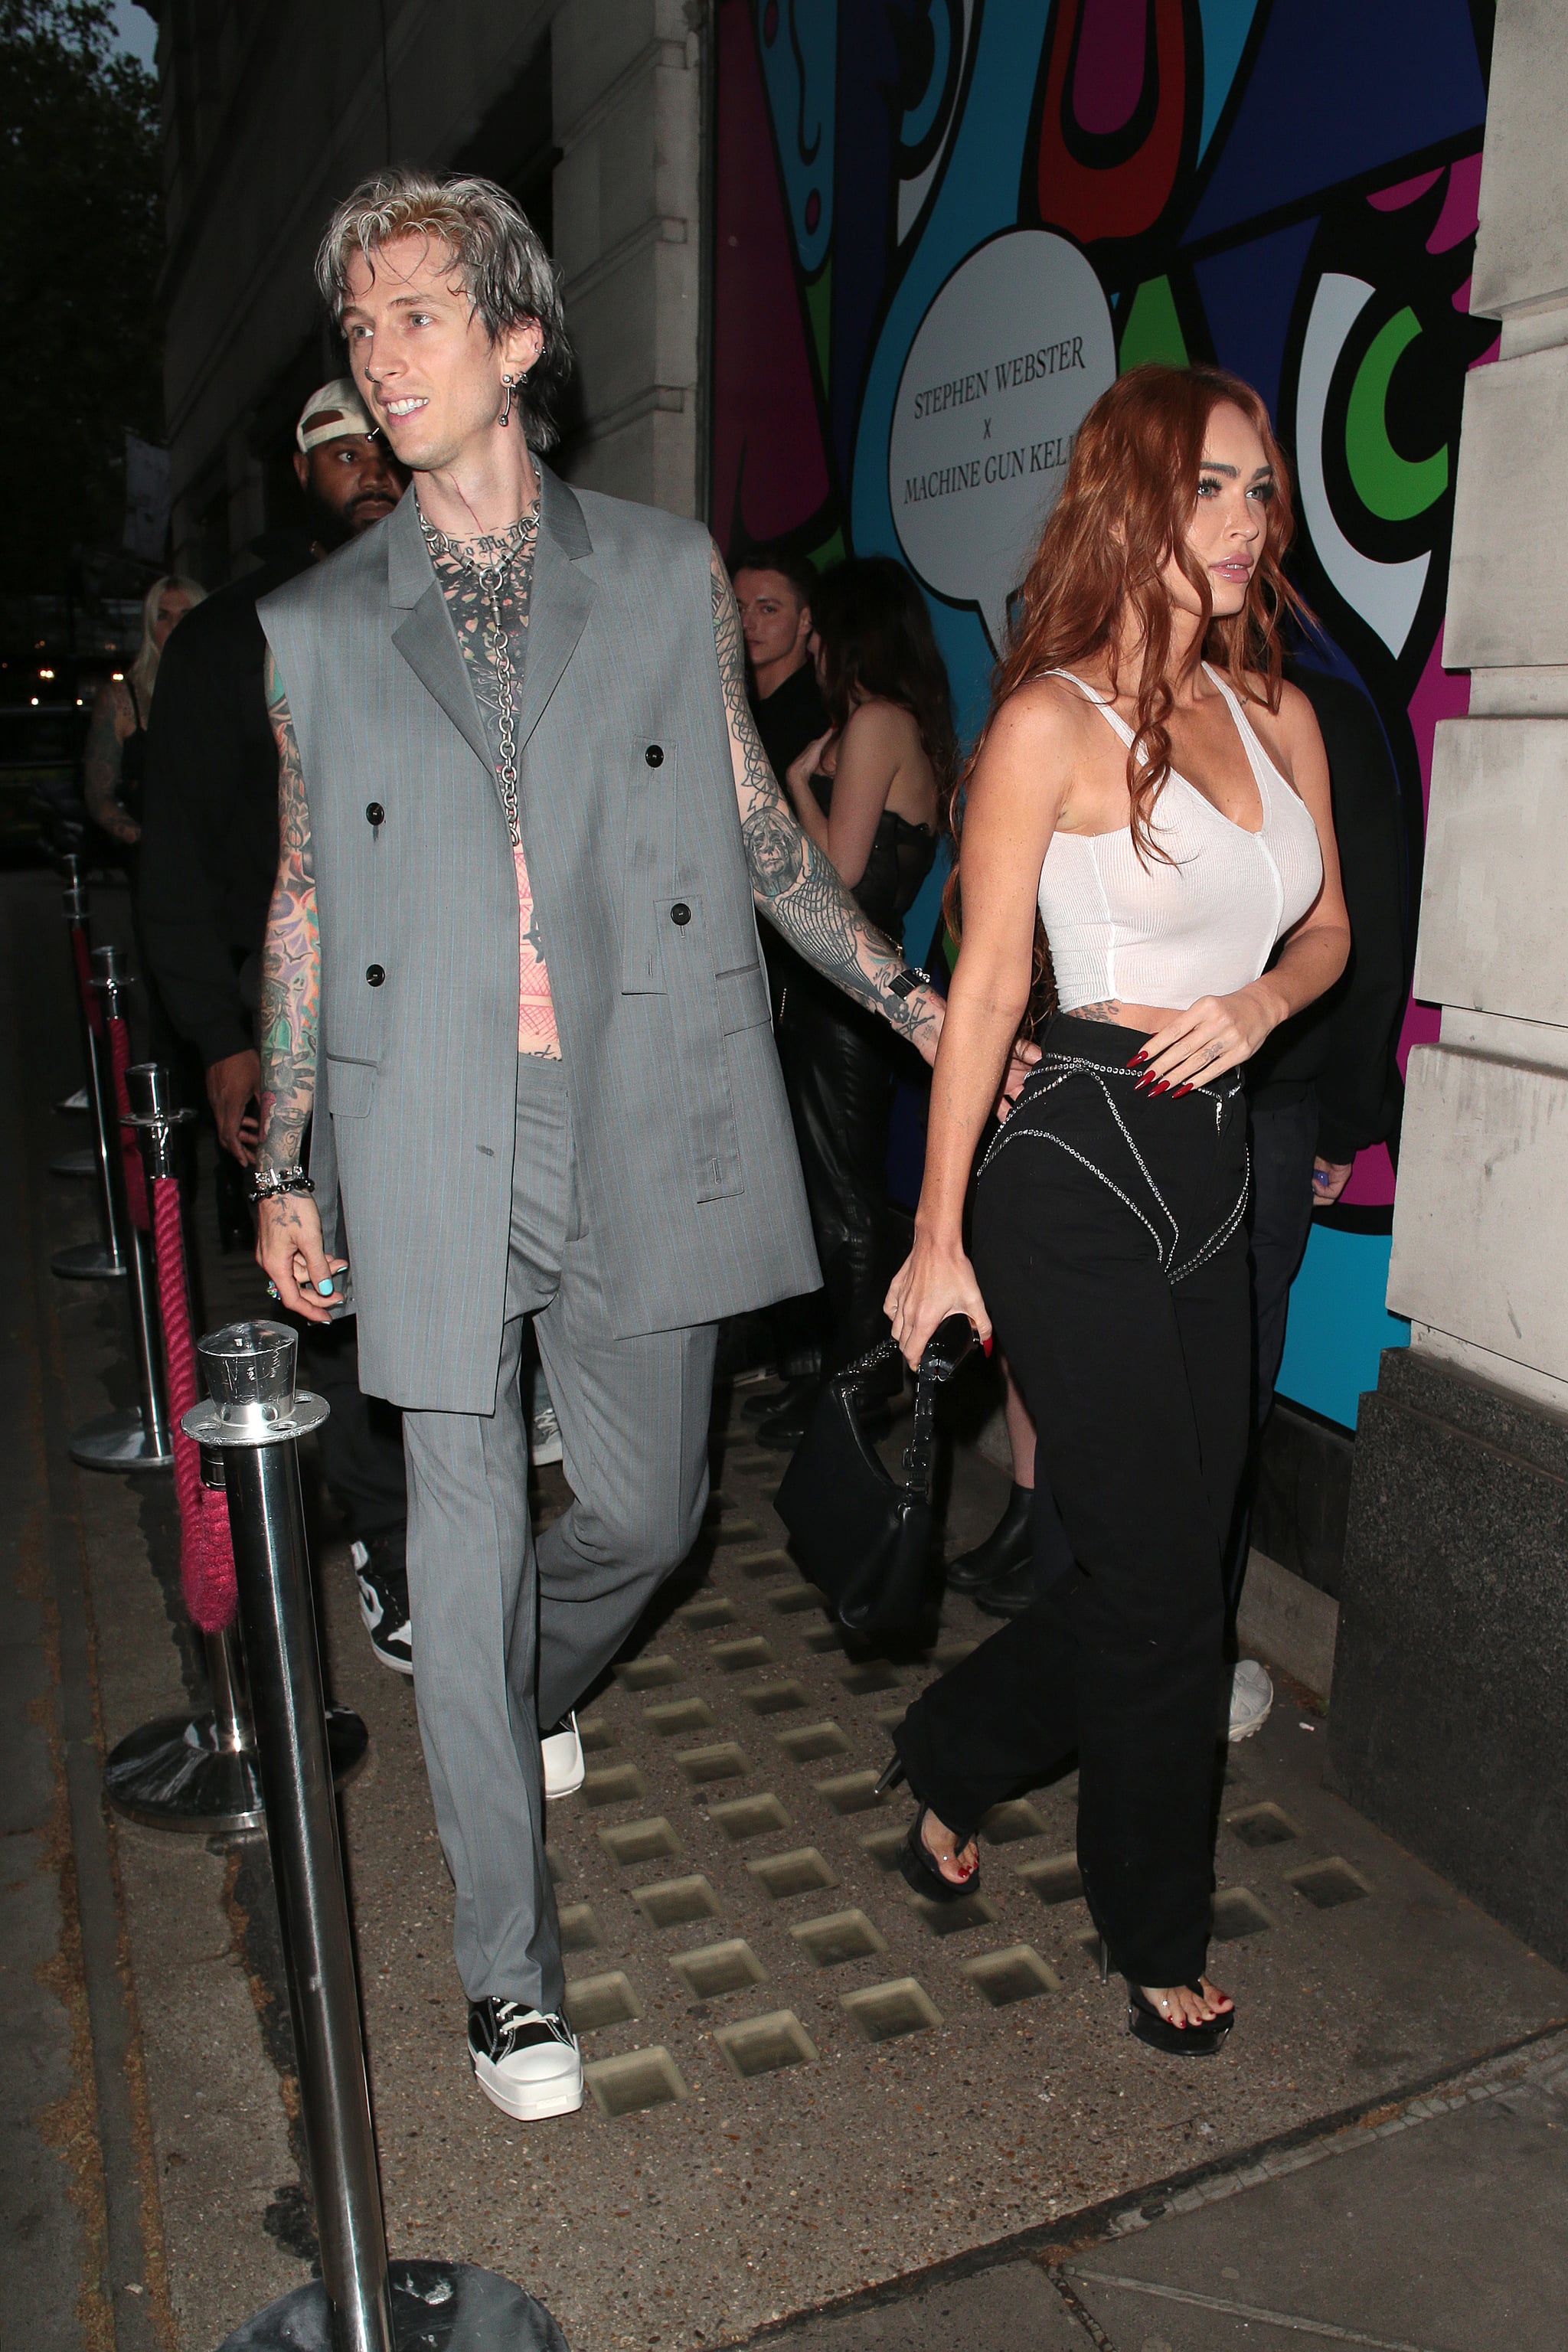 LONDON, ENGLAND - MAY 30:  Machine Gun Kelly and Megan Fox seen attending the unveiling of 'The 8th Deadly Sin - GOSSIP', a limited-edition ring collection by Stephen Webster x Machine Gun Kelly on May 30, 2023 in London, England. (Photo by Ricky Vigil M / Justin E Palmer/GC Images)